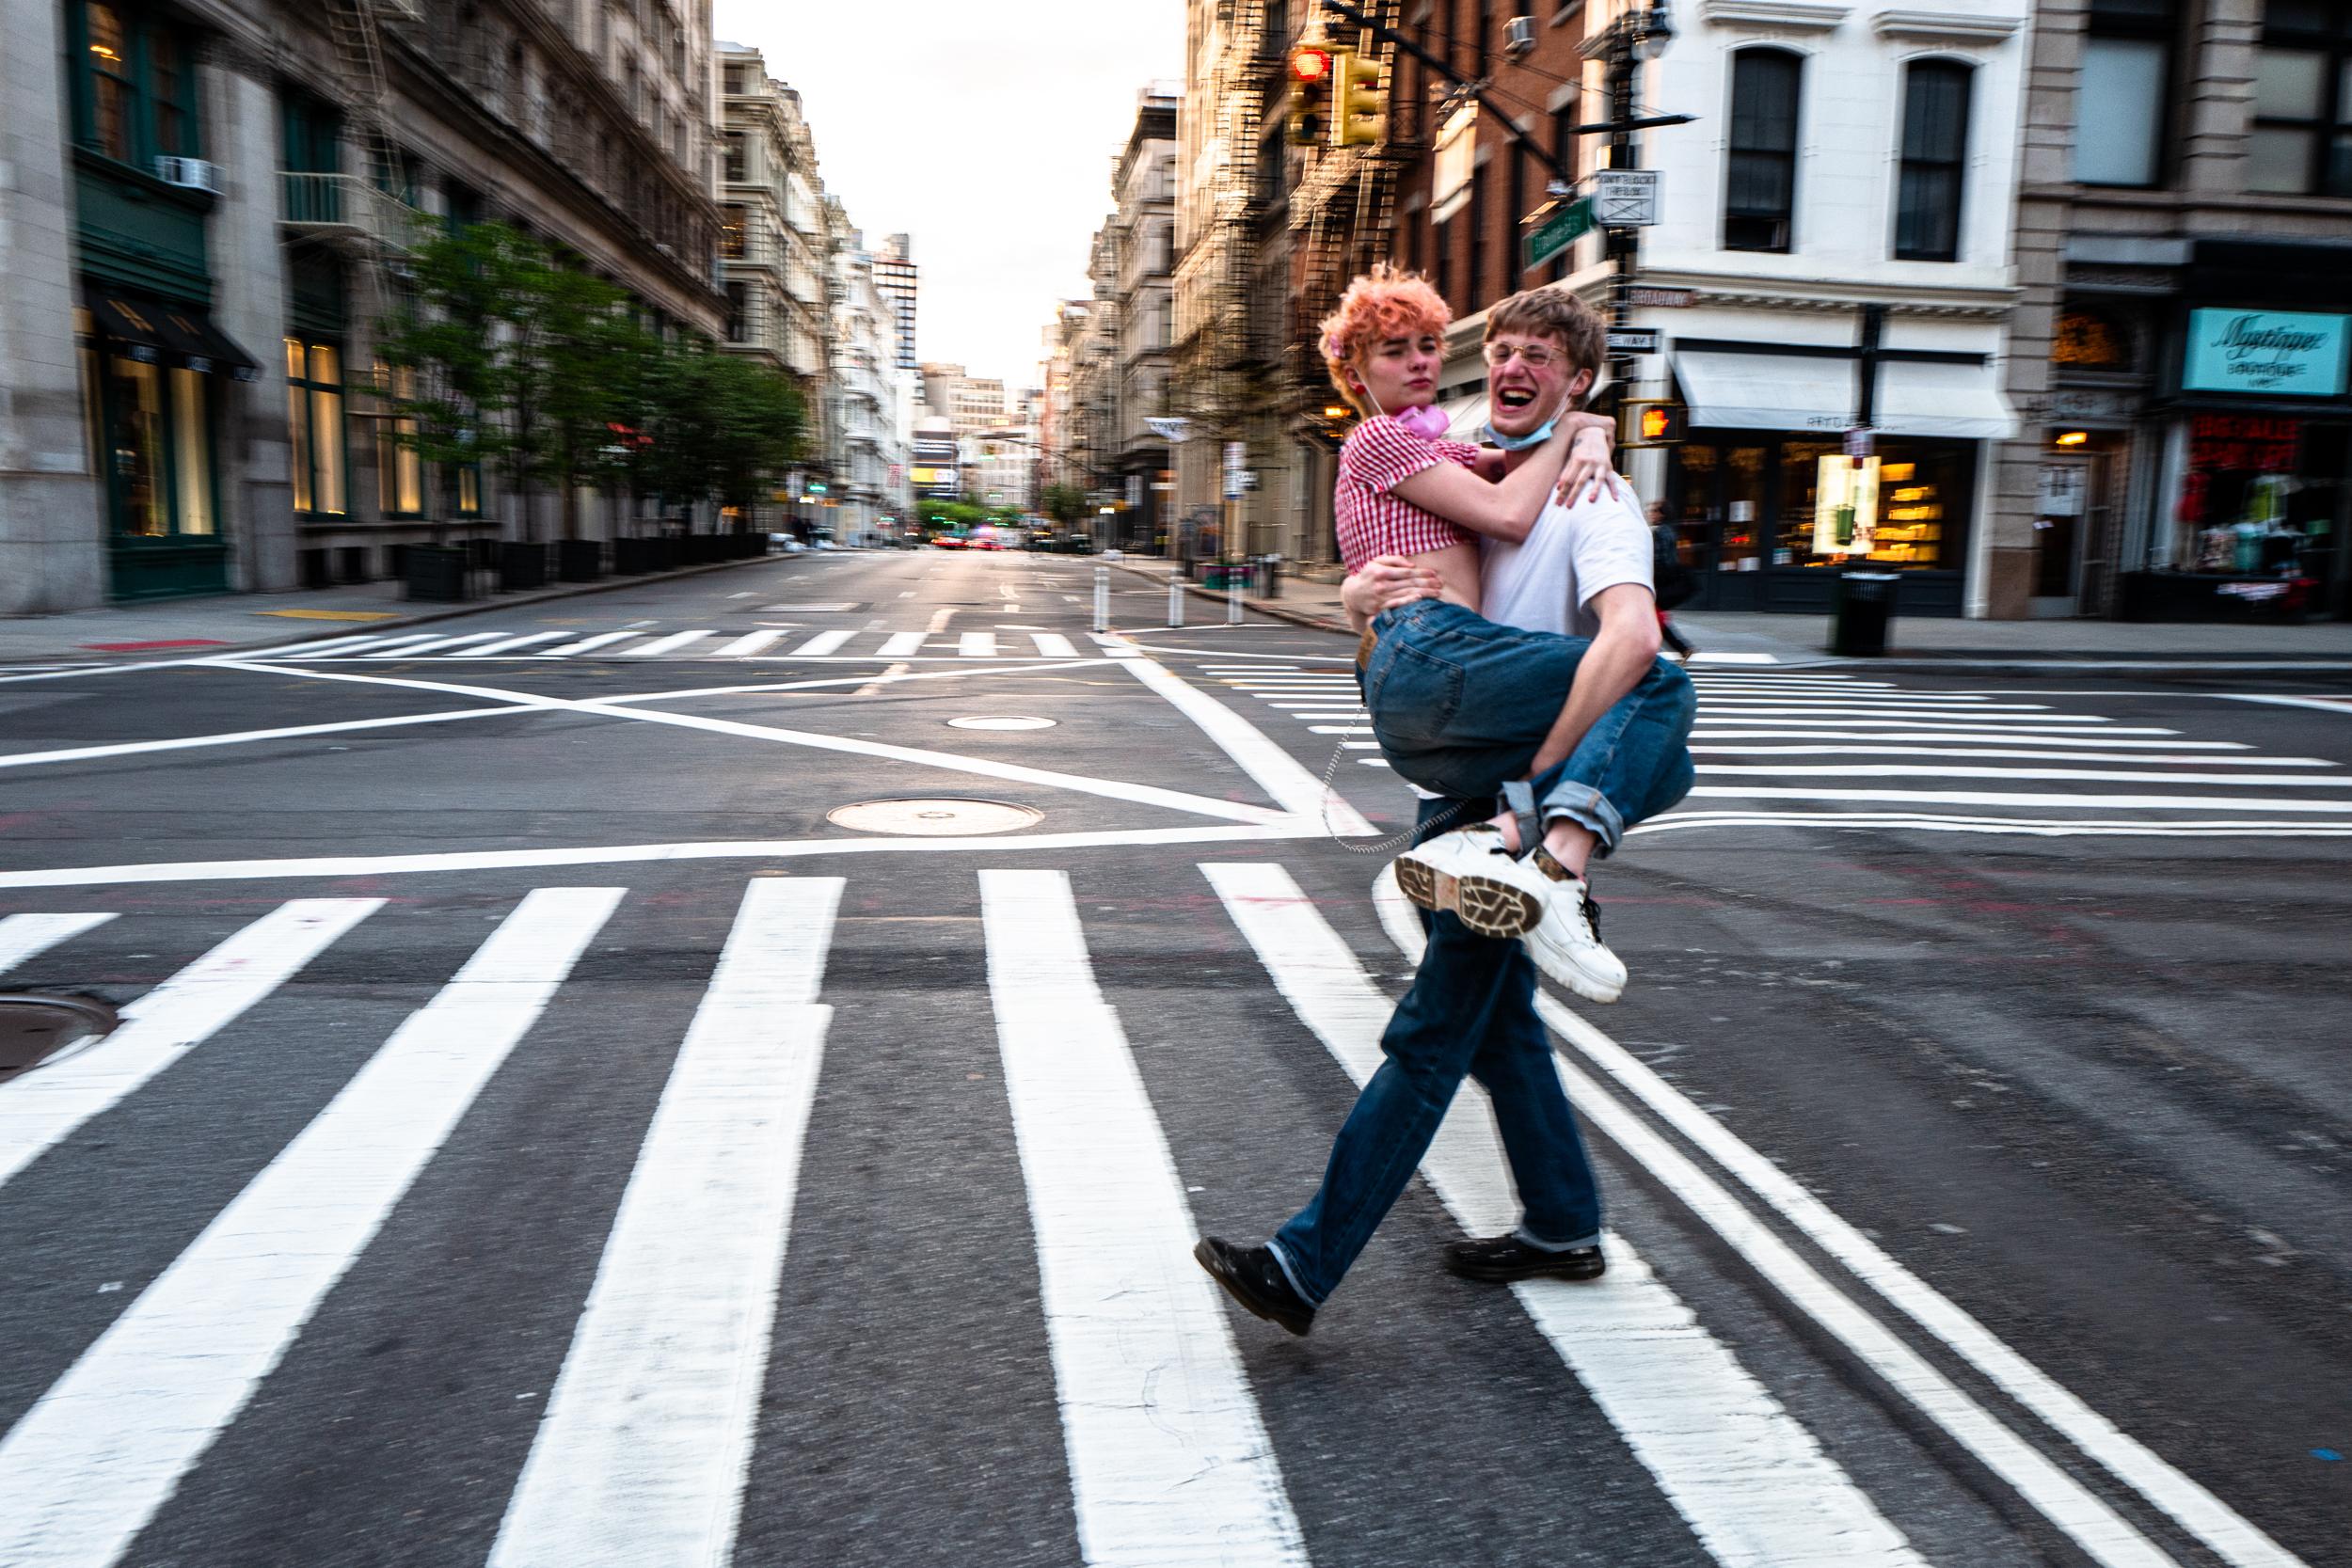 Jean-Luc Fievet Color Photograph - Covid 19 - 2020-05-04- NY - Young Couple on Broadway - Street Scene Photograph